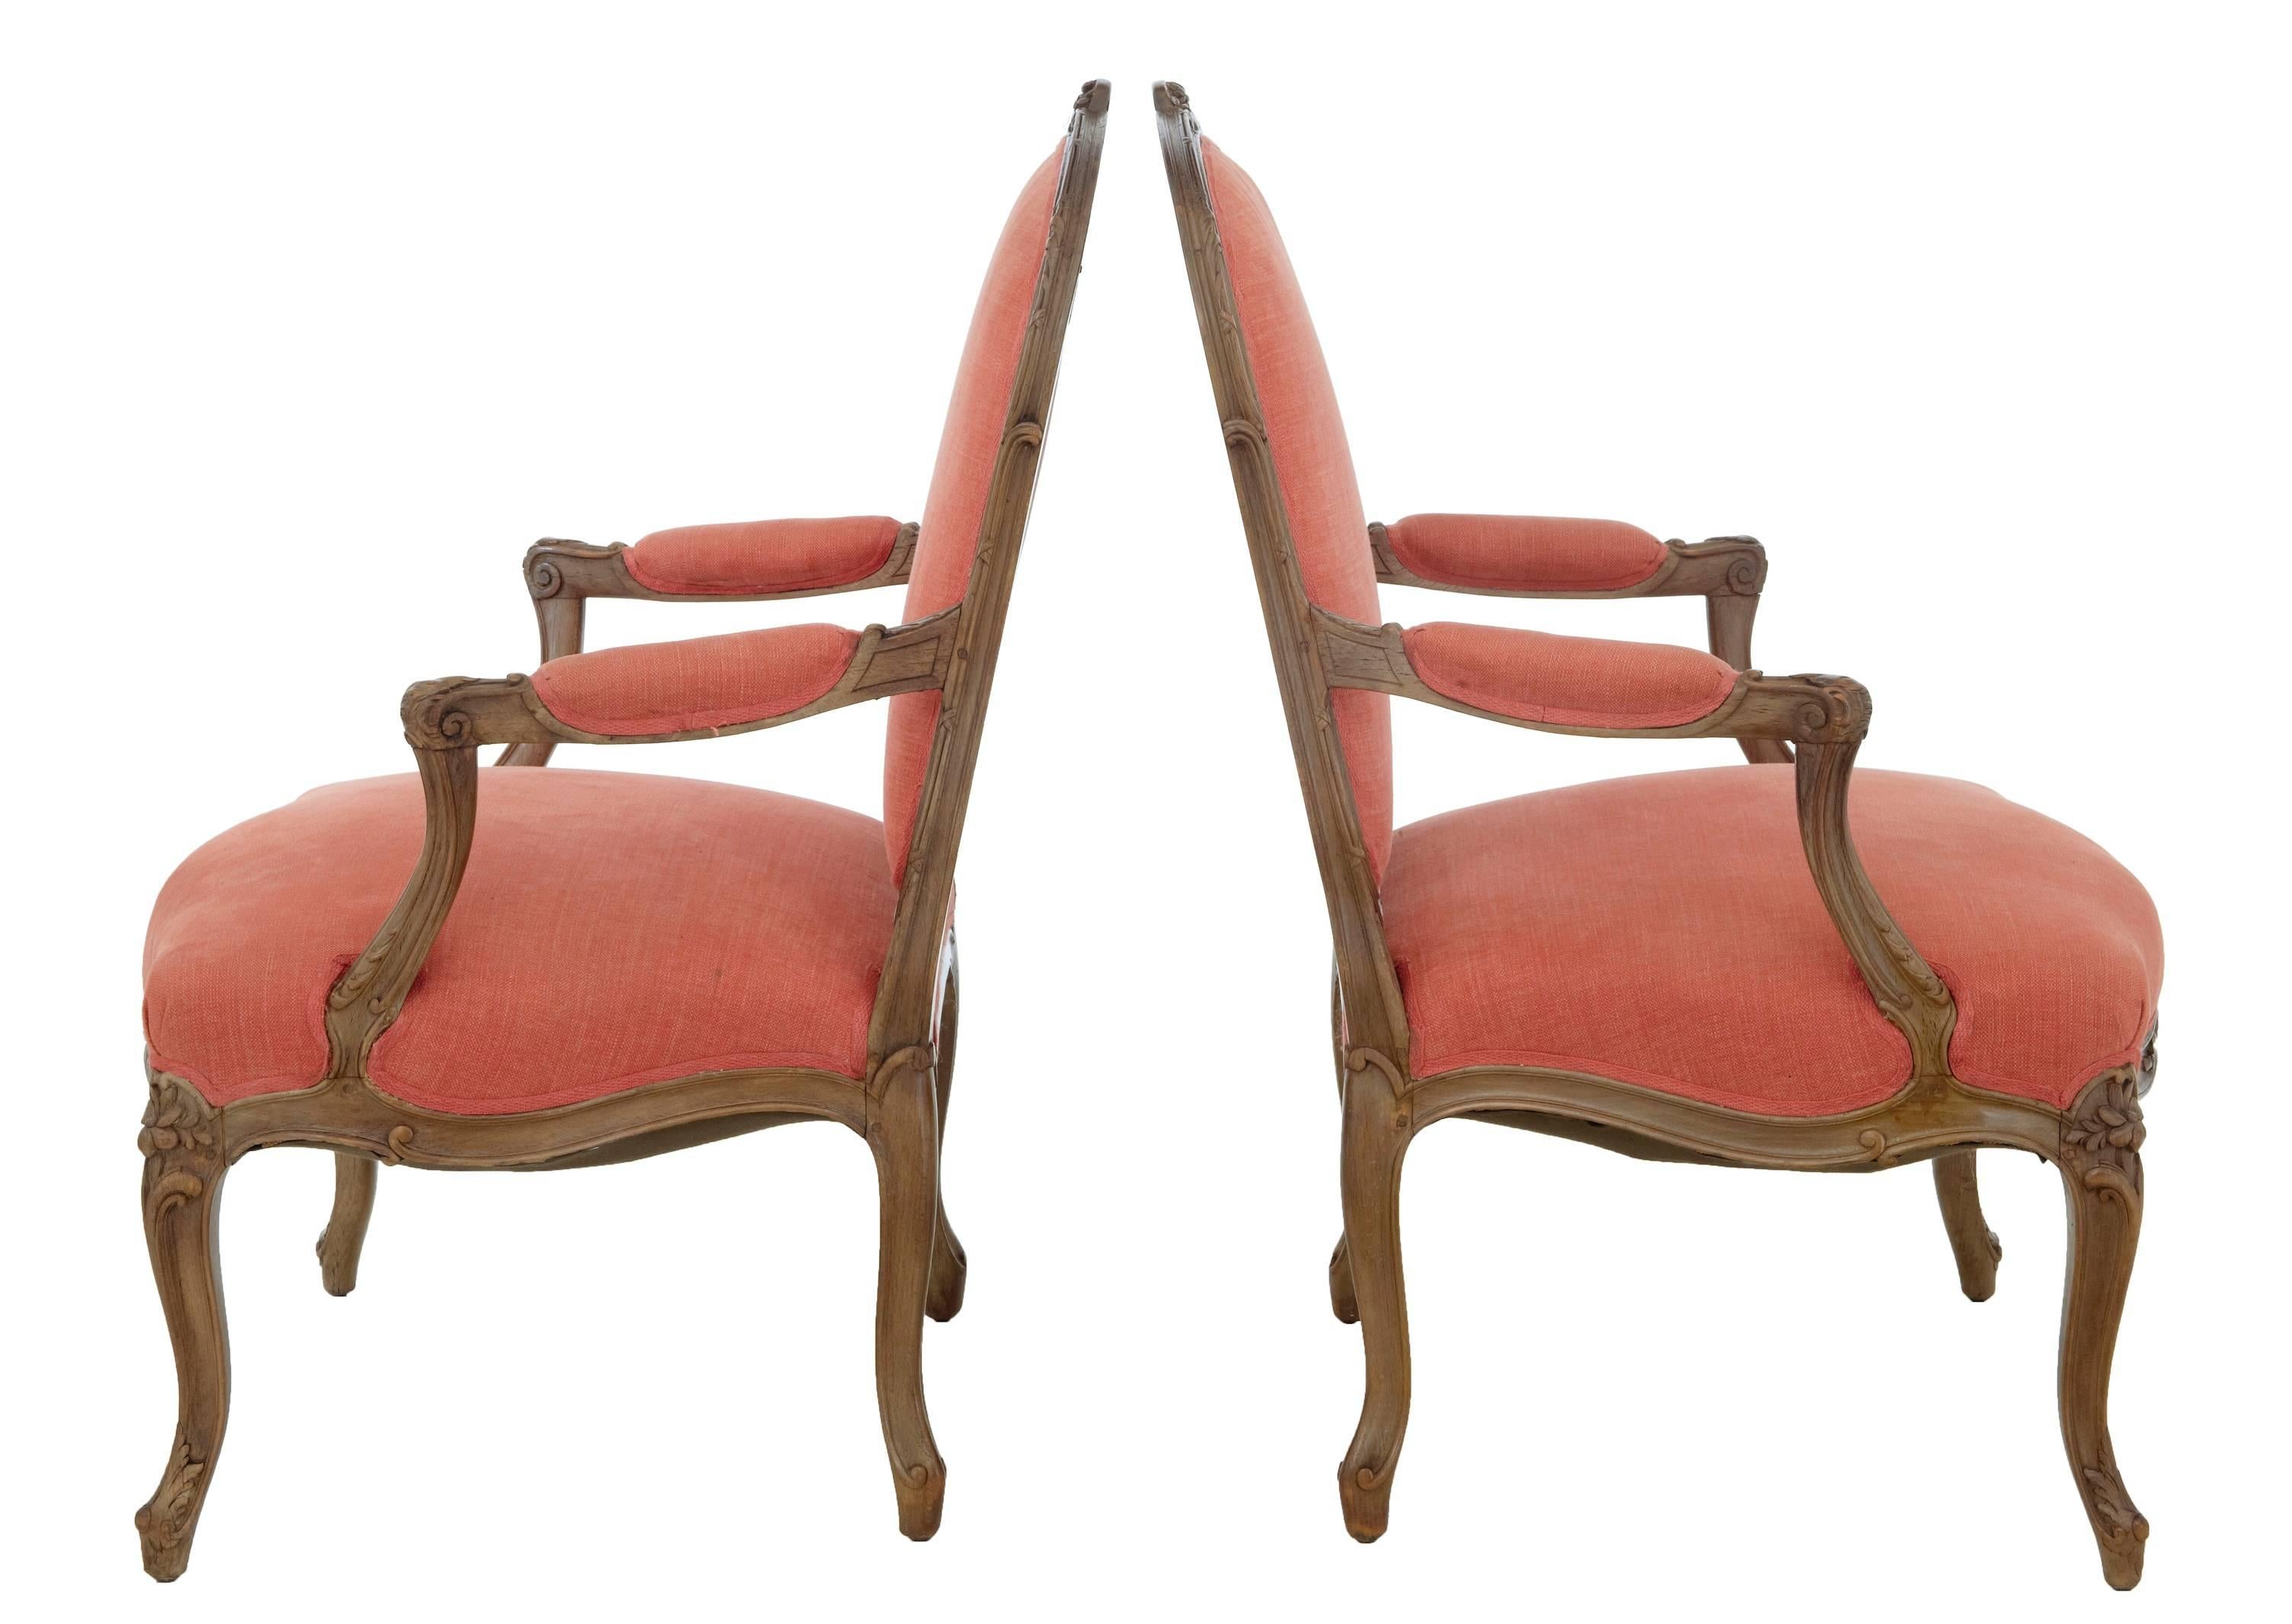 Good quality wide seat pair of walnut armchairs, circa 1870.
Carved on all the frame elements, nice light walnut color.
Later fabric is in good clean condition.

Height: 38